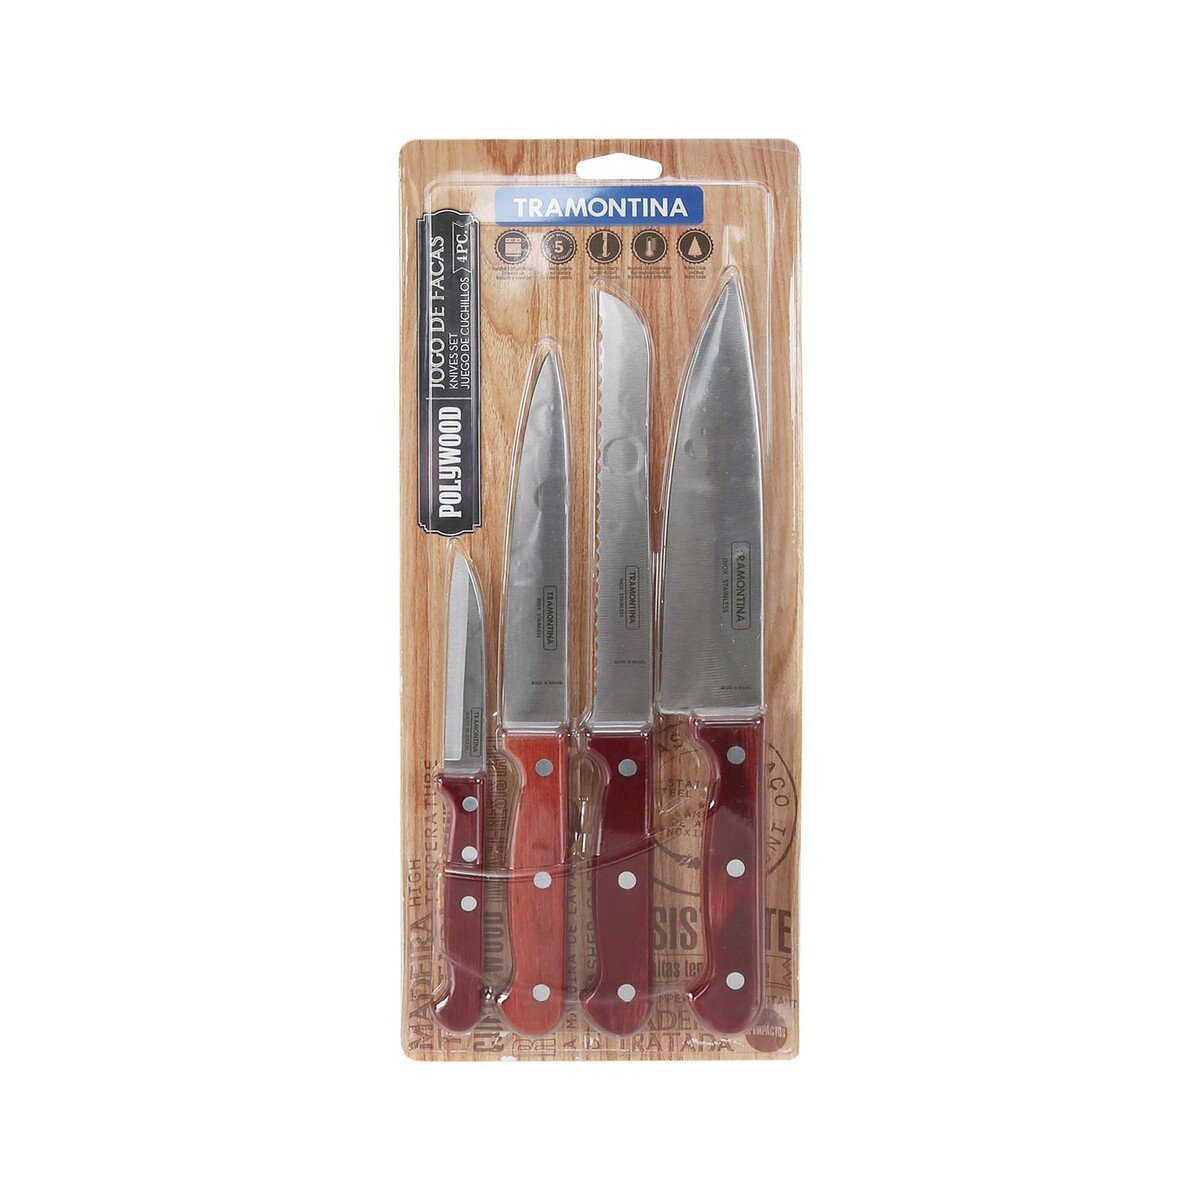 Tramontina Stainless Steel Knife Set With Wooden Handle, 4 Pcs, Inox, 21199781